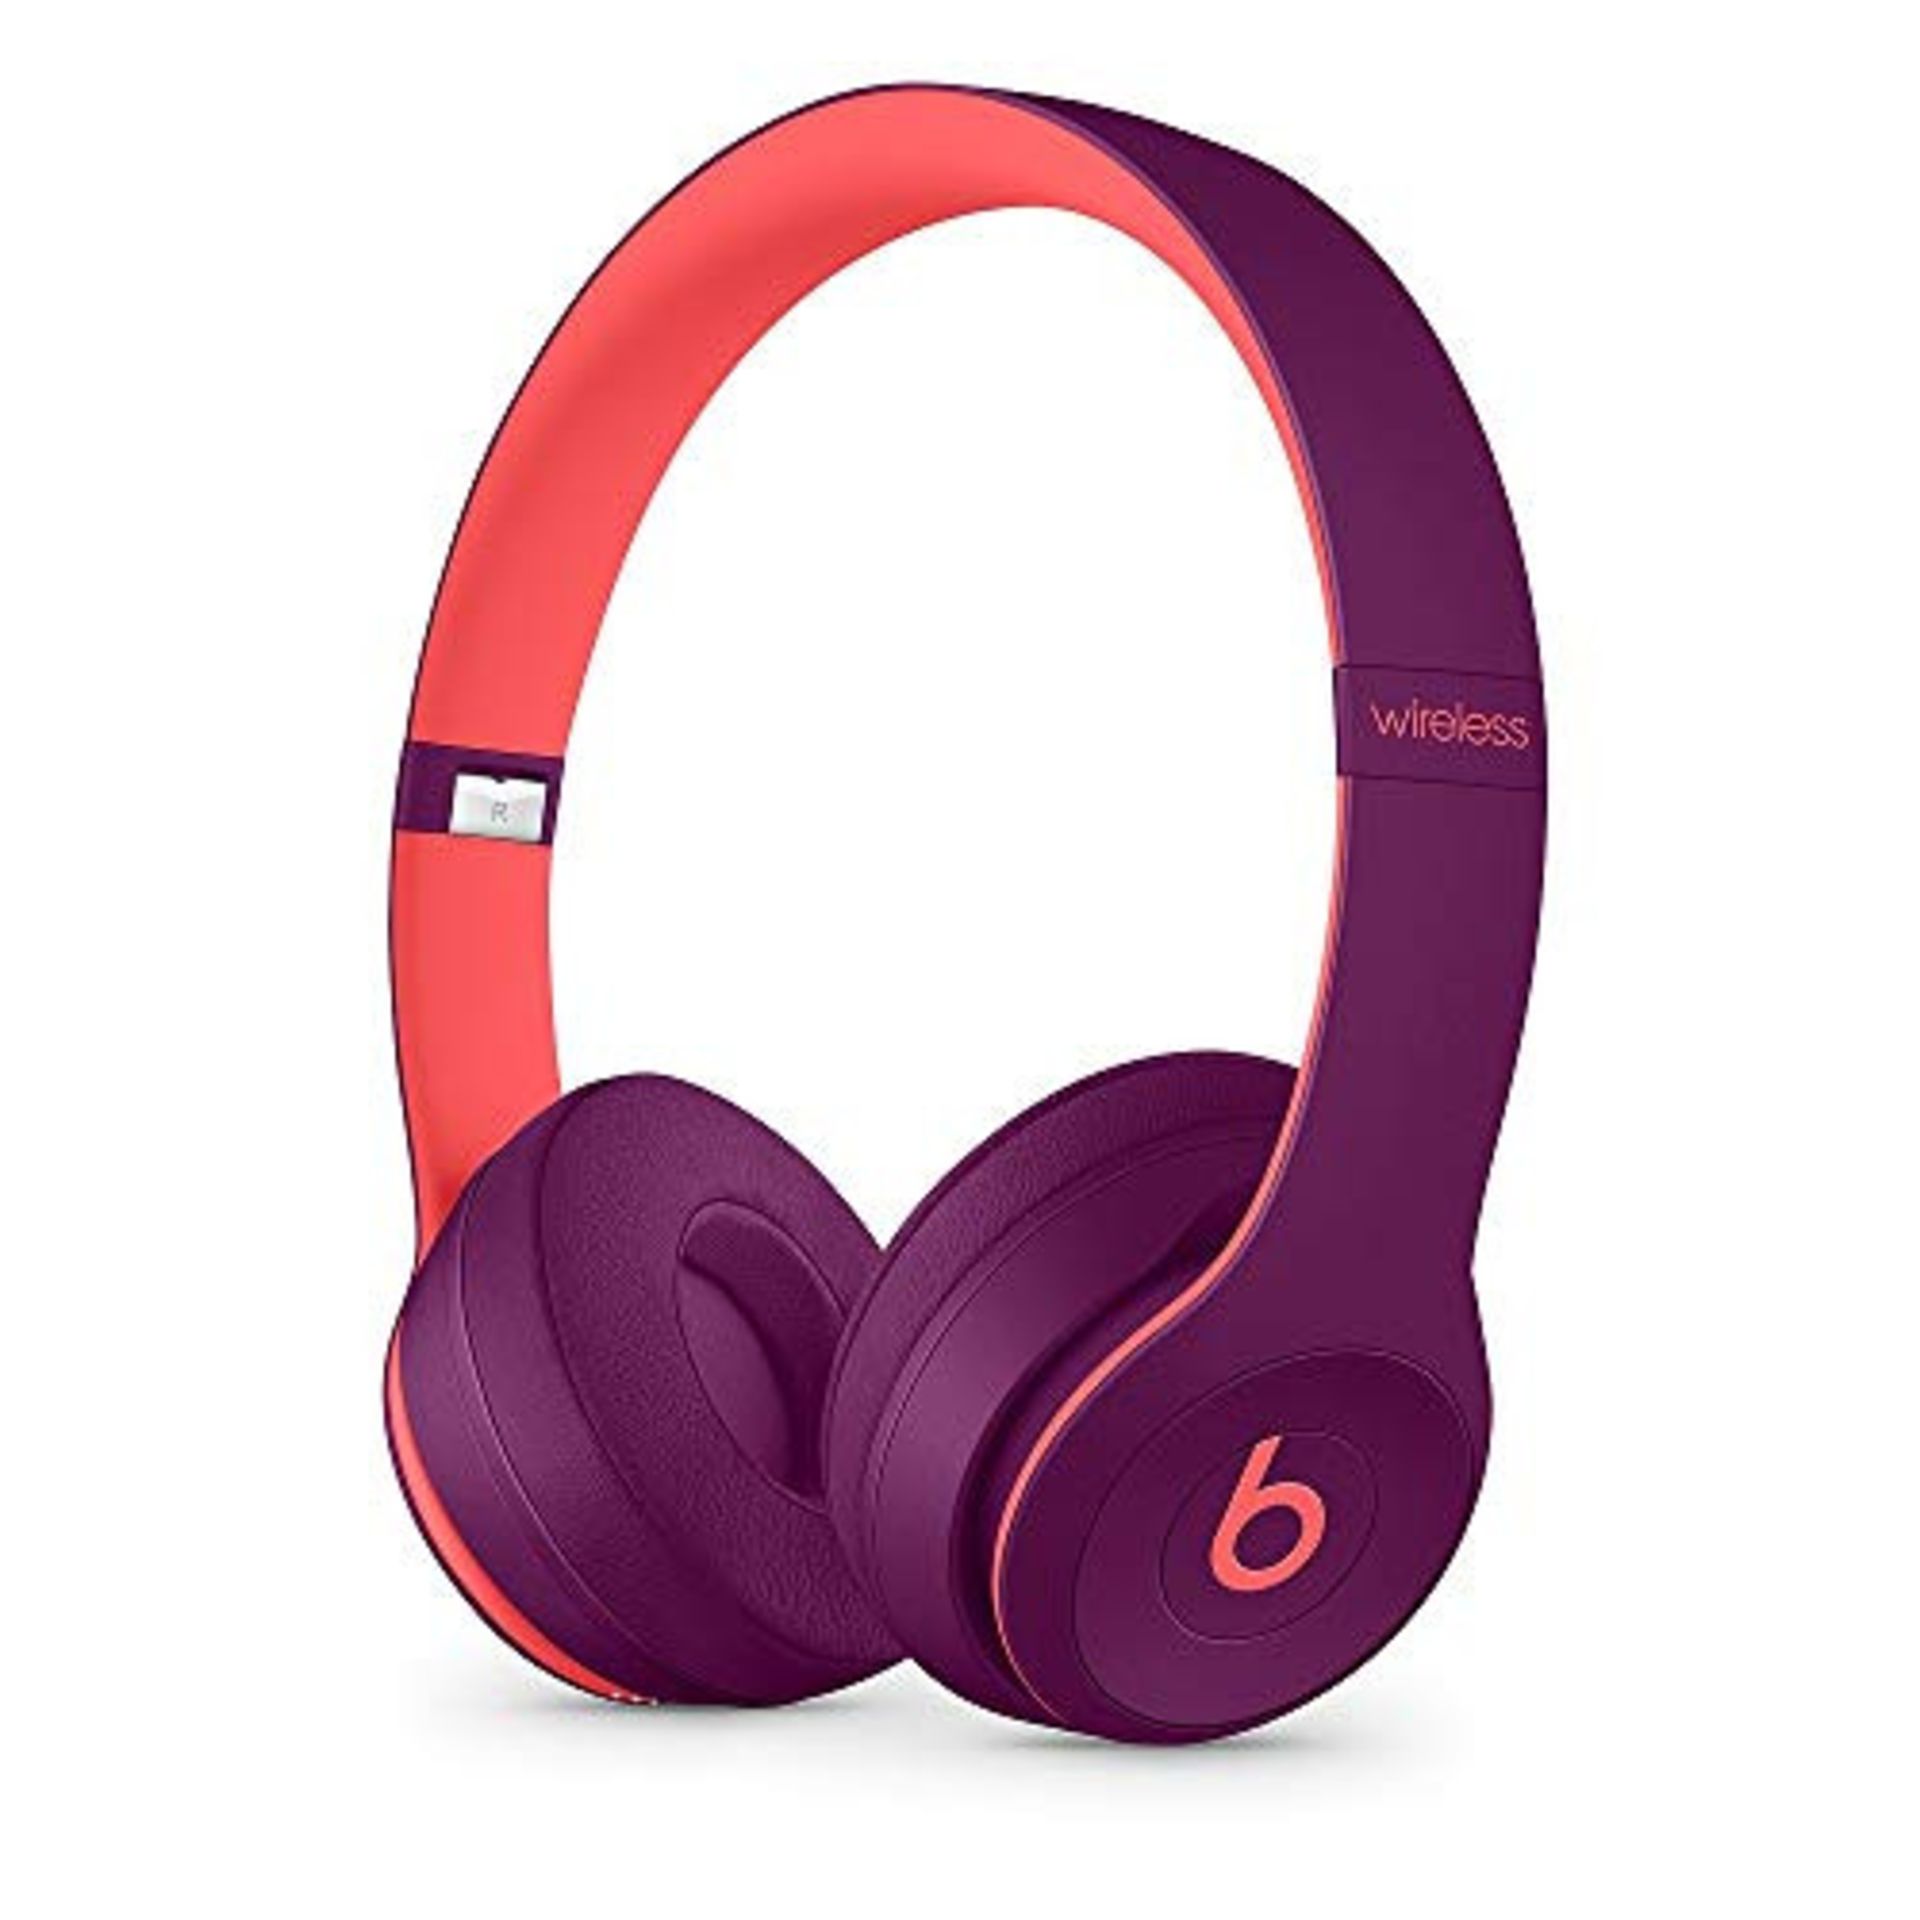 + VAT Brand New Beats Solo 3 Wireless Bluetooth Headphones Magenta - Wireless Connect To Your